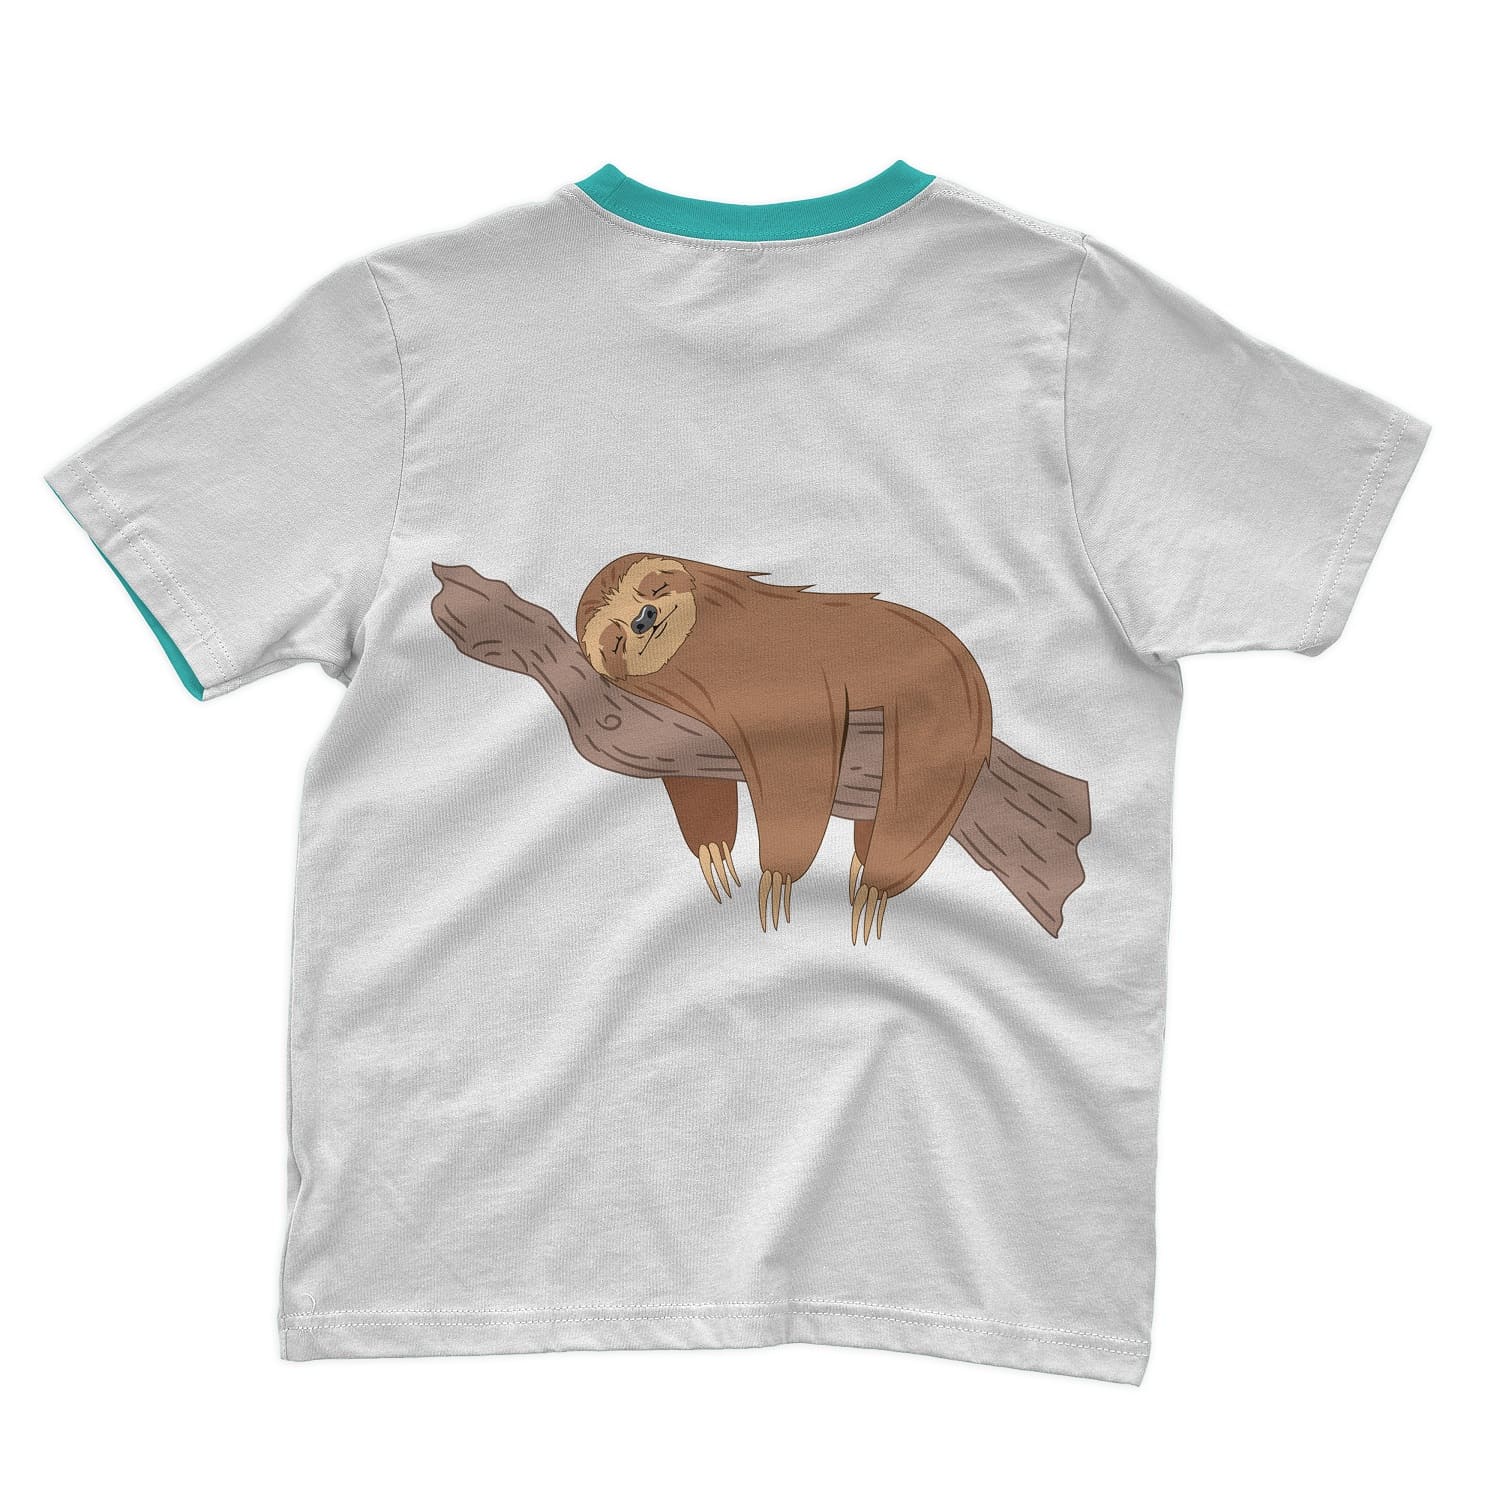 The gray T-shirt depicts a sloth sleeping on a wooden branch.